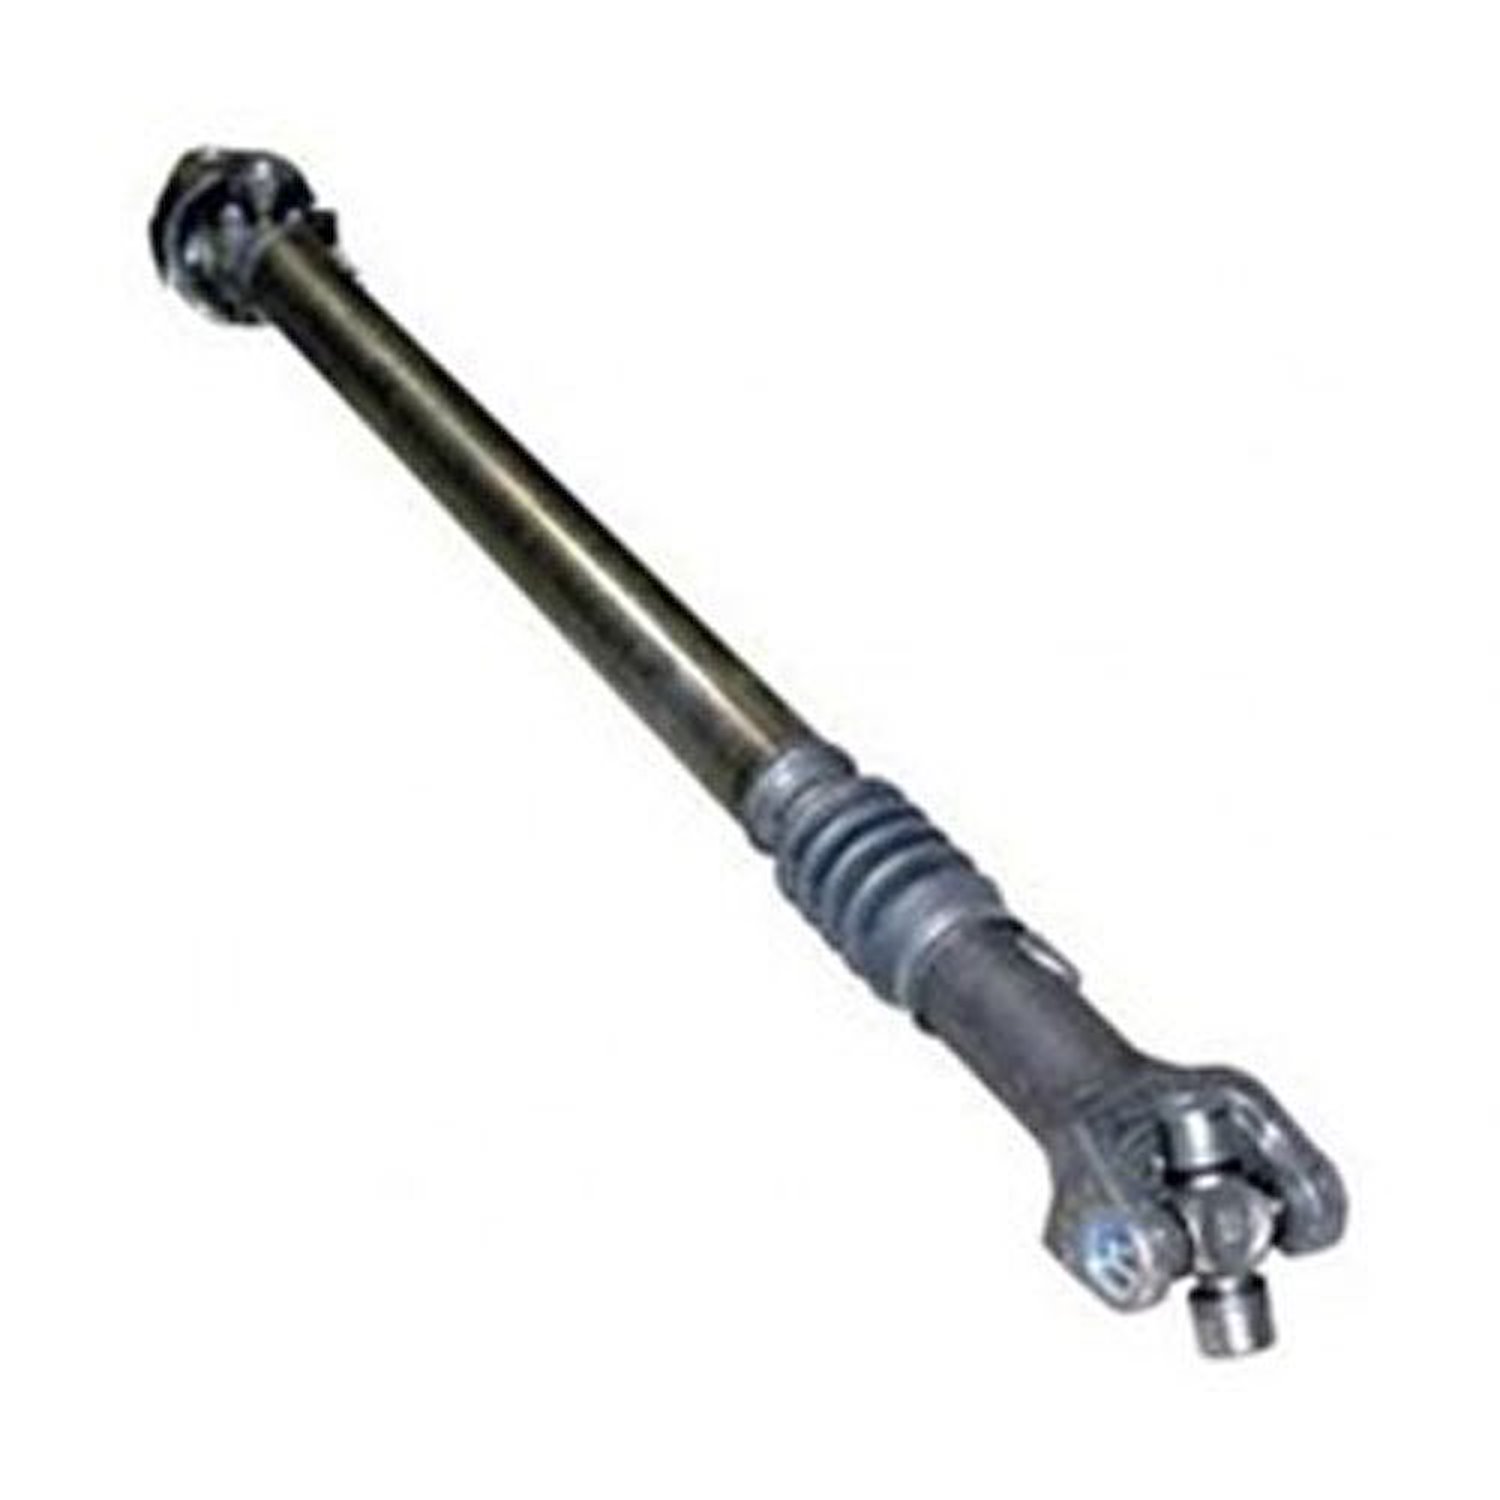 Stock replacement front driveshaft from Omix-ADA, Fits 01-02 Jeep Wrangler TJ with 2.5 liter